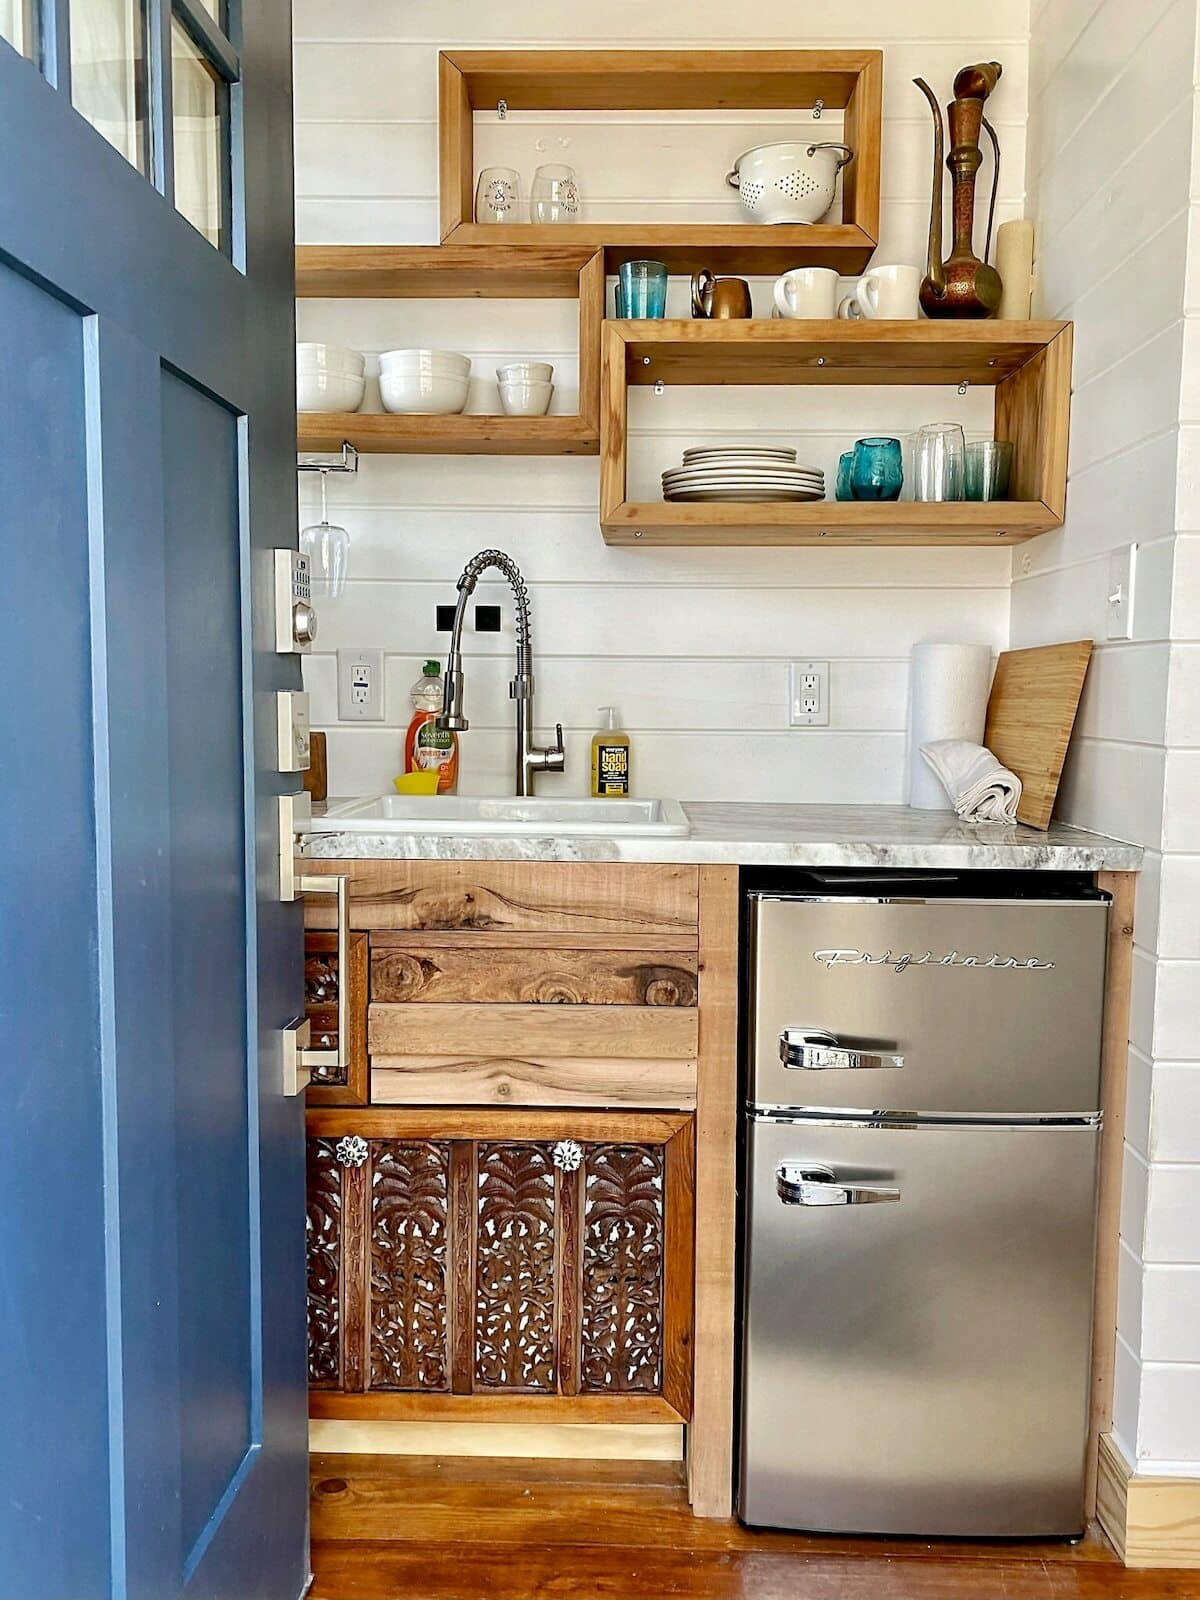 A secured entry door leads into a kitchen with a mini modern retro style Frigidaire top-freezer refrigerator with pull handles